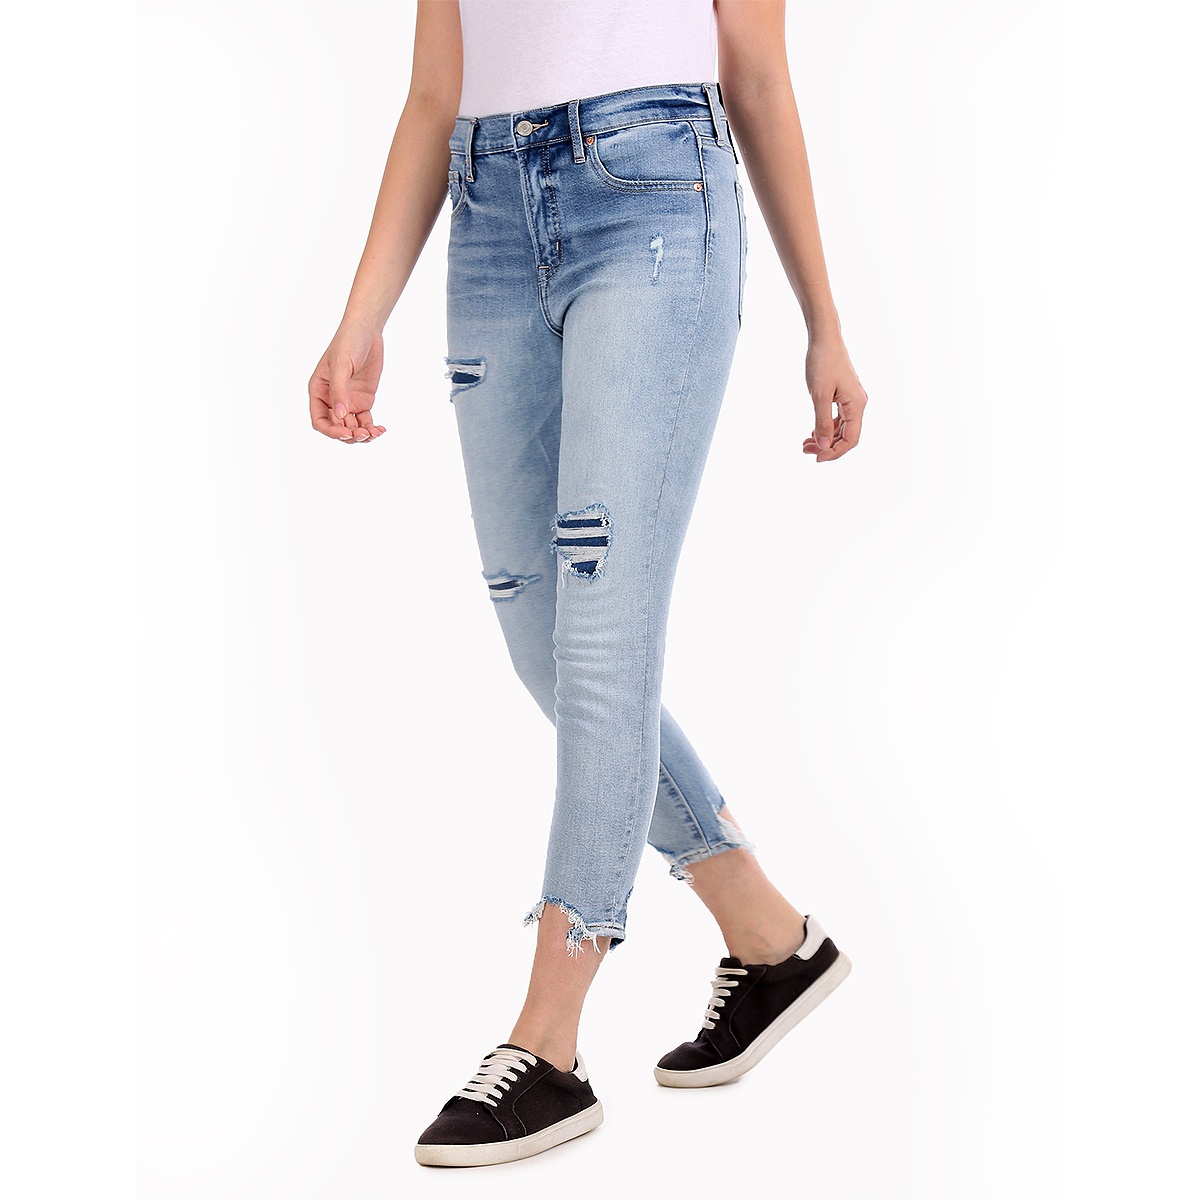 Gap High Rise Skinny Fit Washed Jeans Styled with Heavy Distress & Raw Hems - Lt. Blue